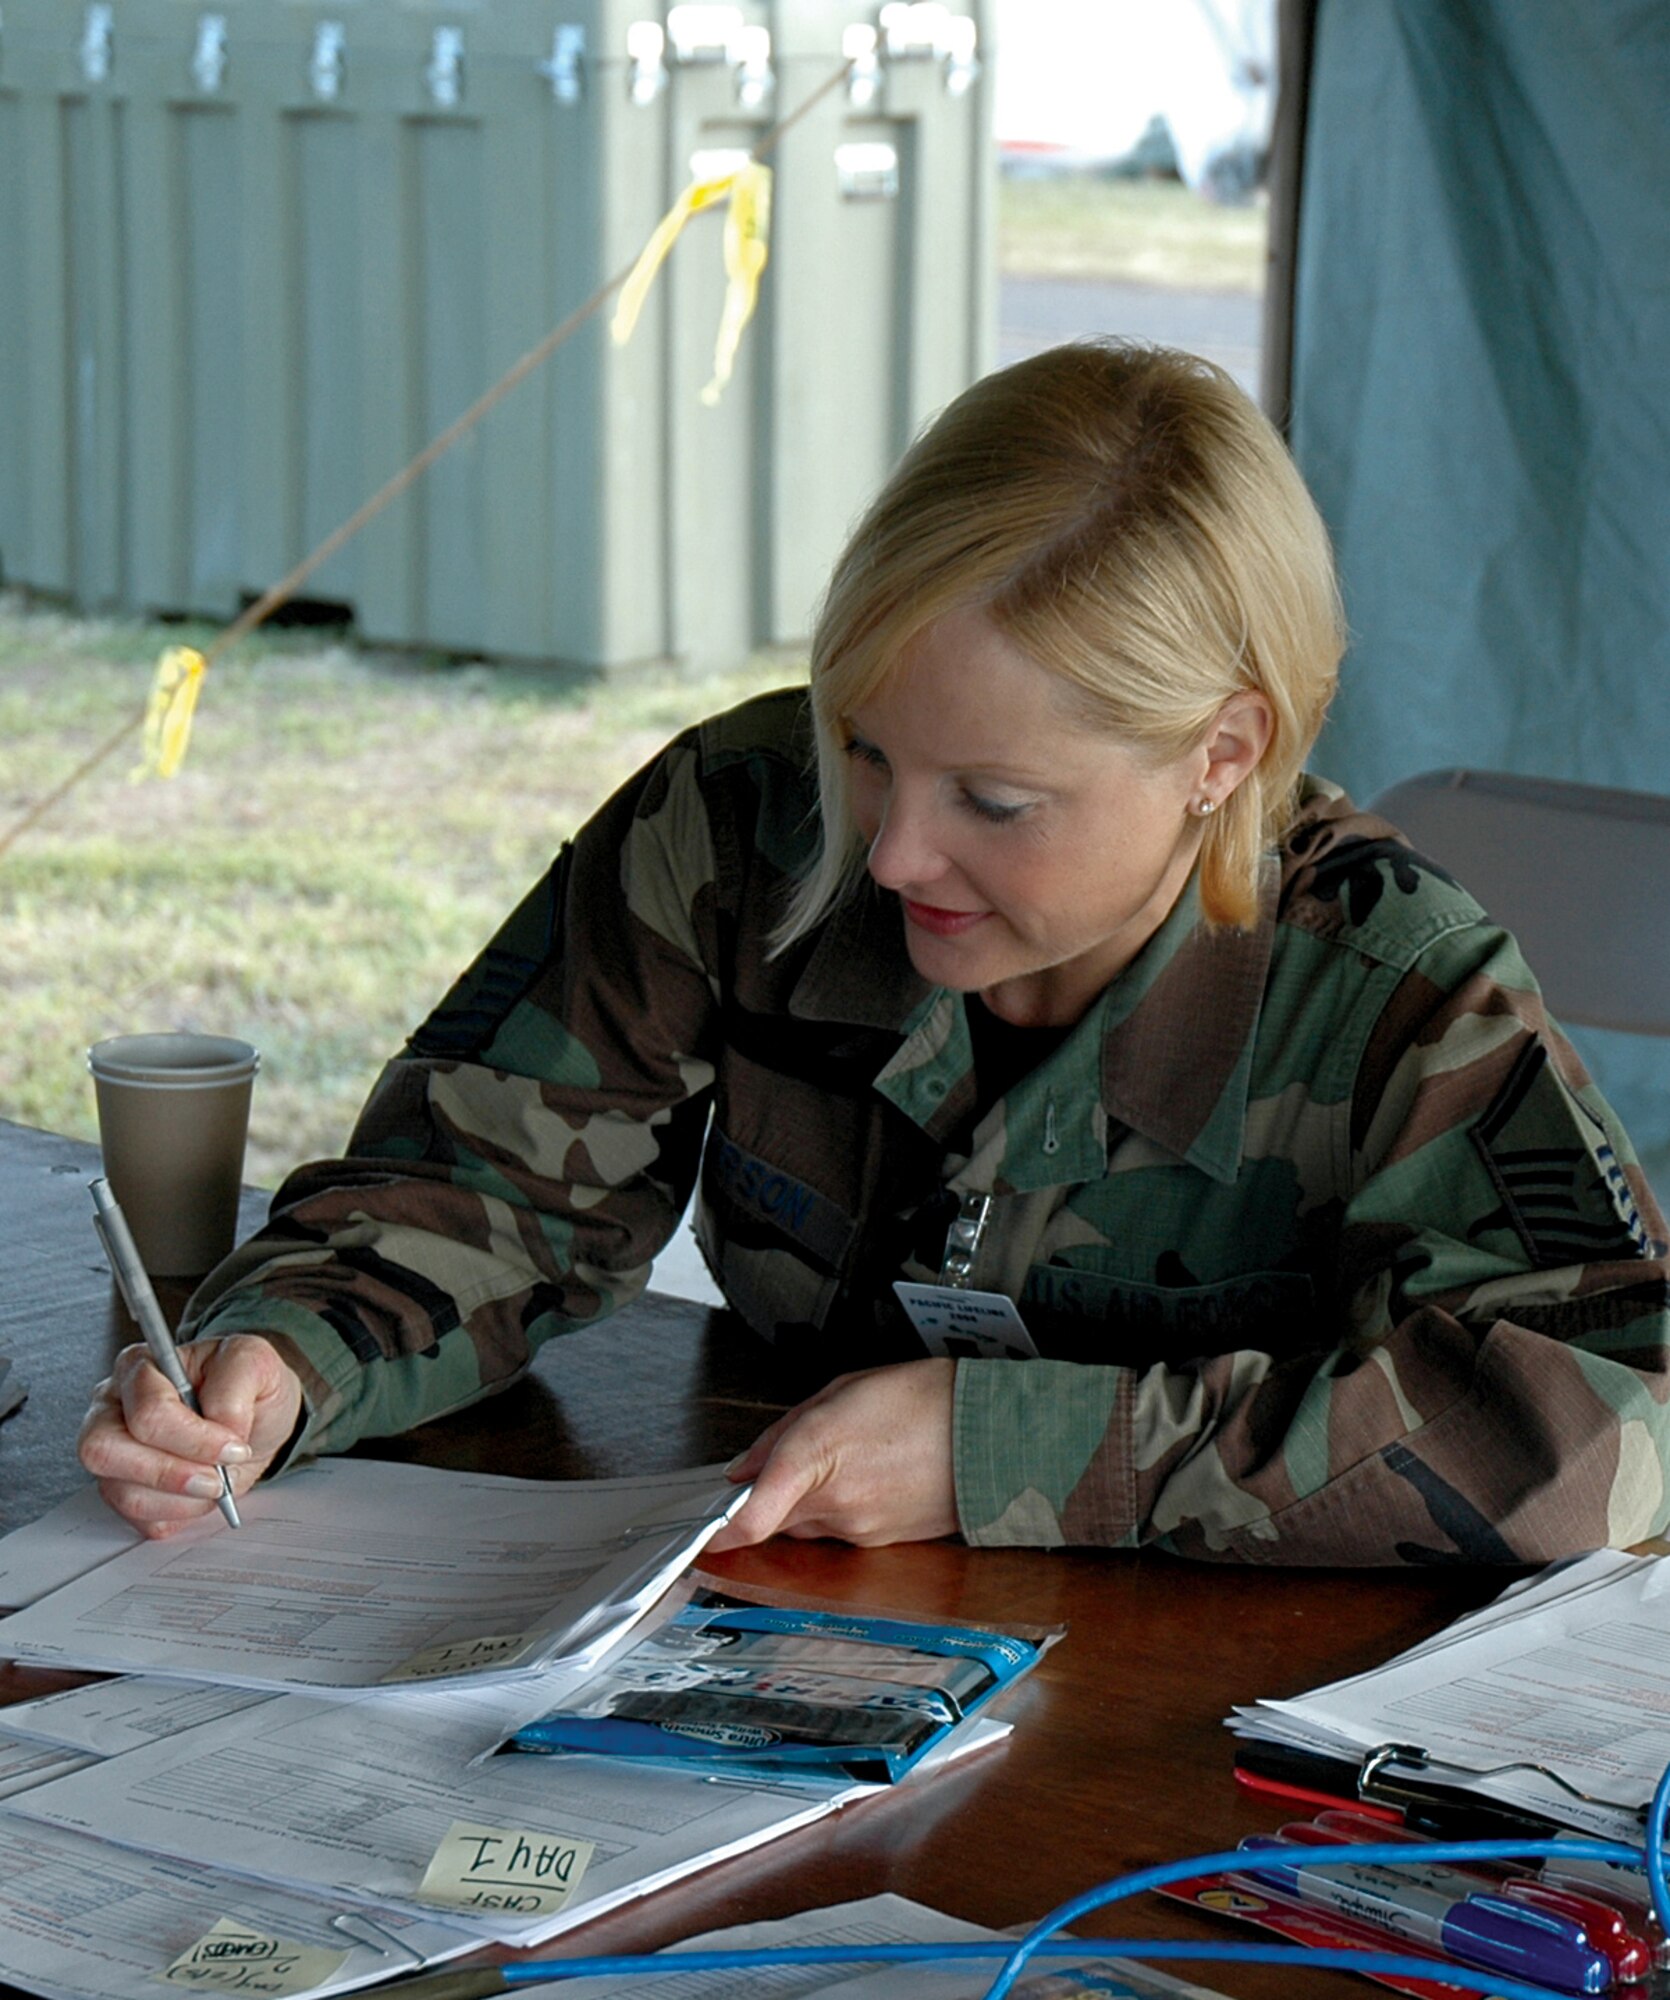 Master Sgt. Michelle Anderson creates patient records for the Pacific Lifeline exercise in February. A Reservist with the 446th Aeromedical Staging Squadron, McChord Air Force Base, Wash., Sergeant Anderson's performance at Pacific Lifeline earned her an invitation to the international exercise called MEDCEUR that took place May 2-14 in Croatia.  (U.S. Air Force photo/Capt. Jennifer Gernardt)  